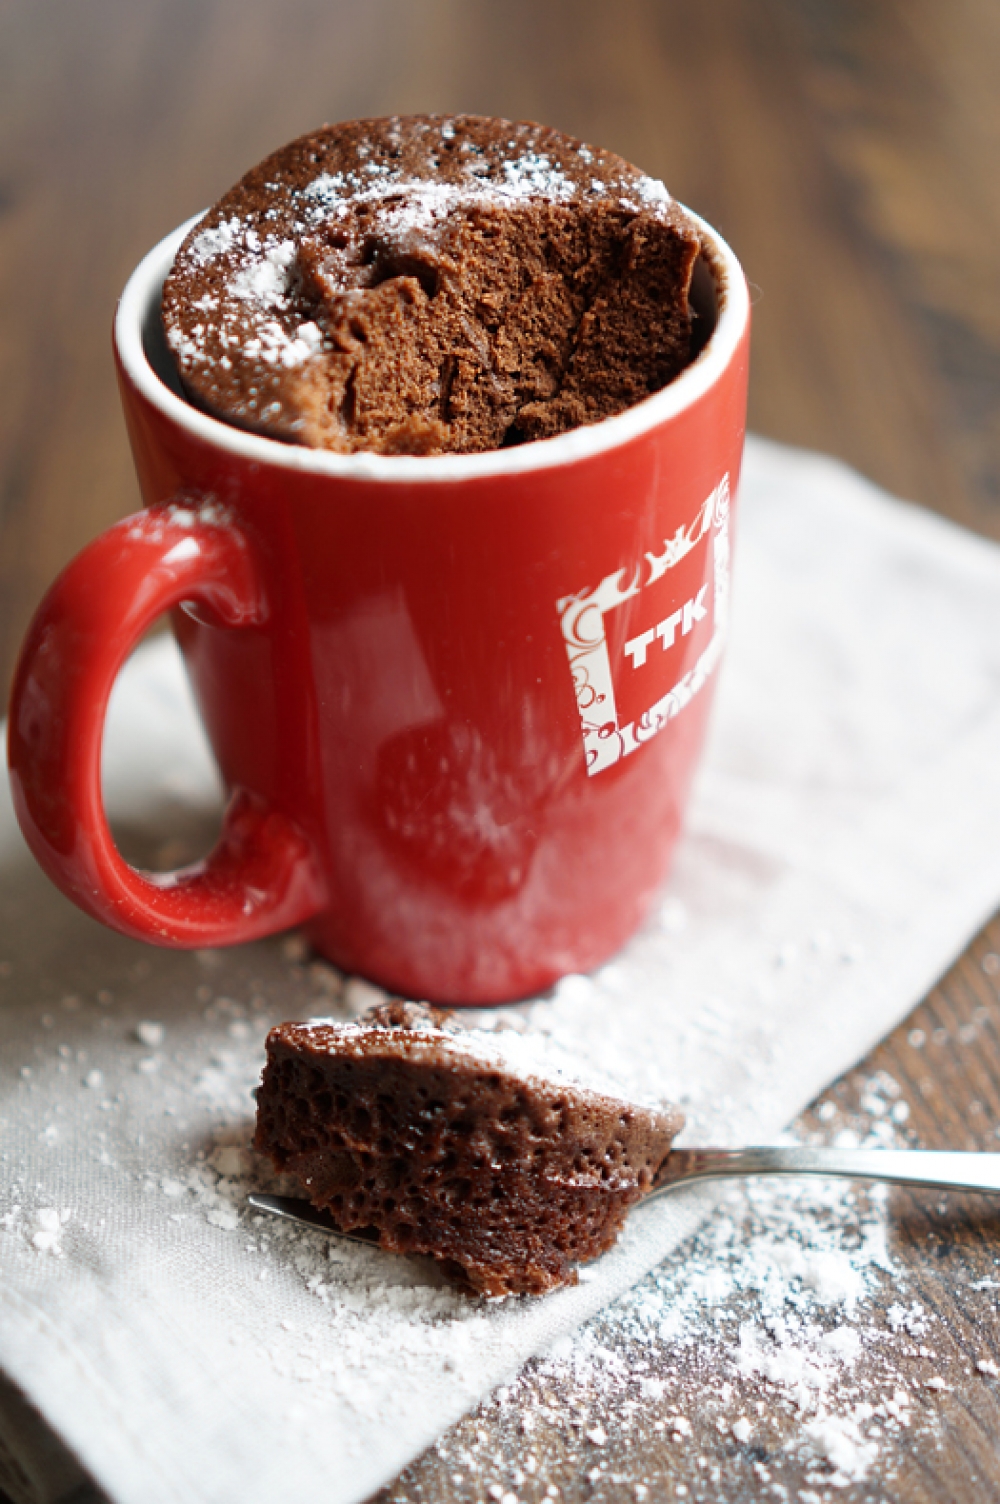 Chocolate cake in a cup in 3 minutes